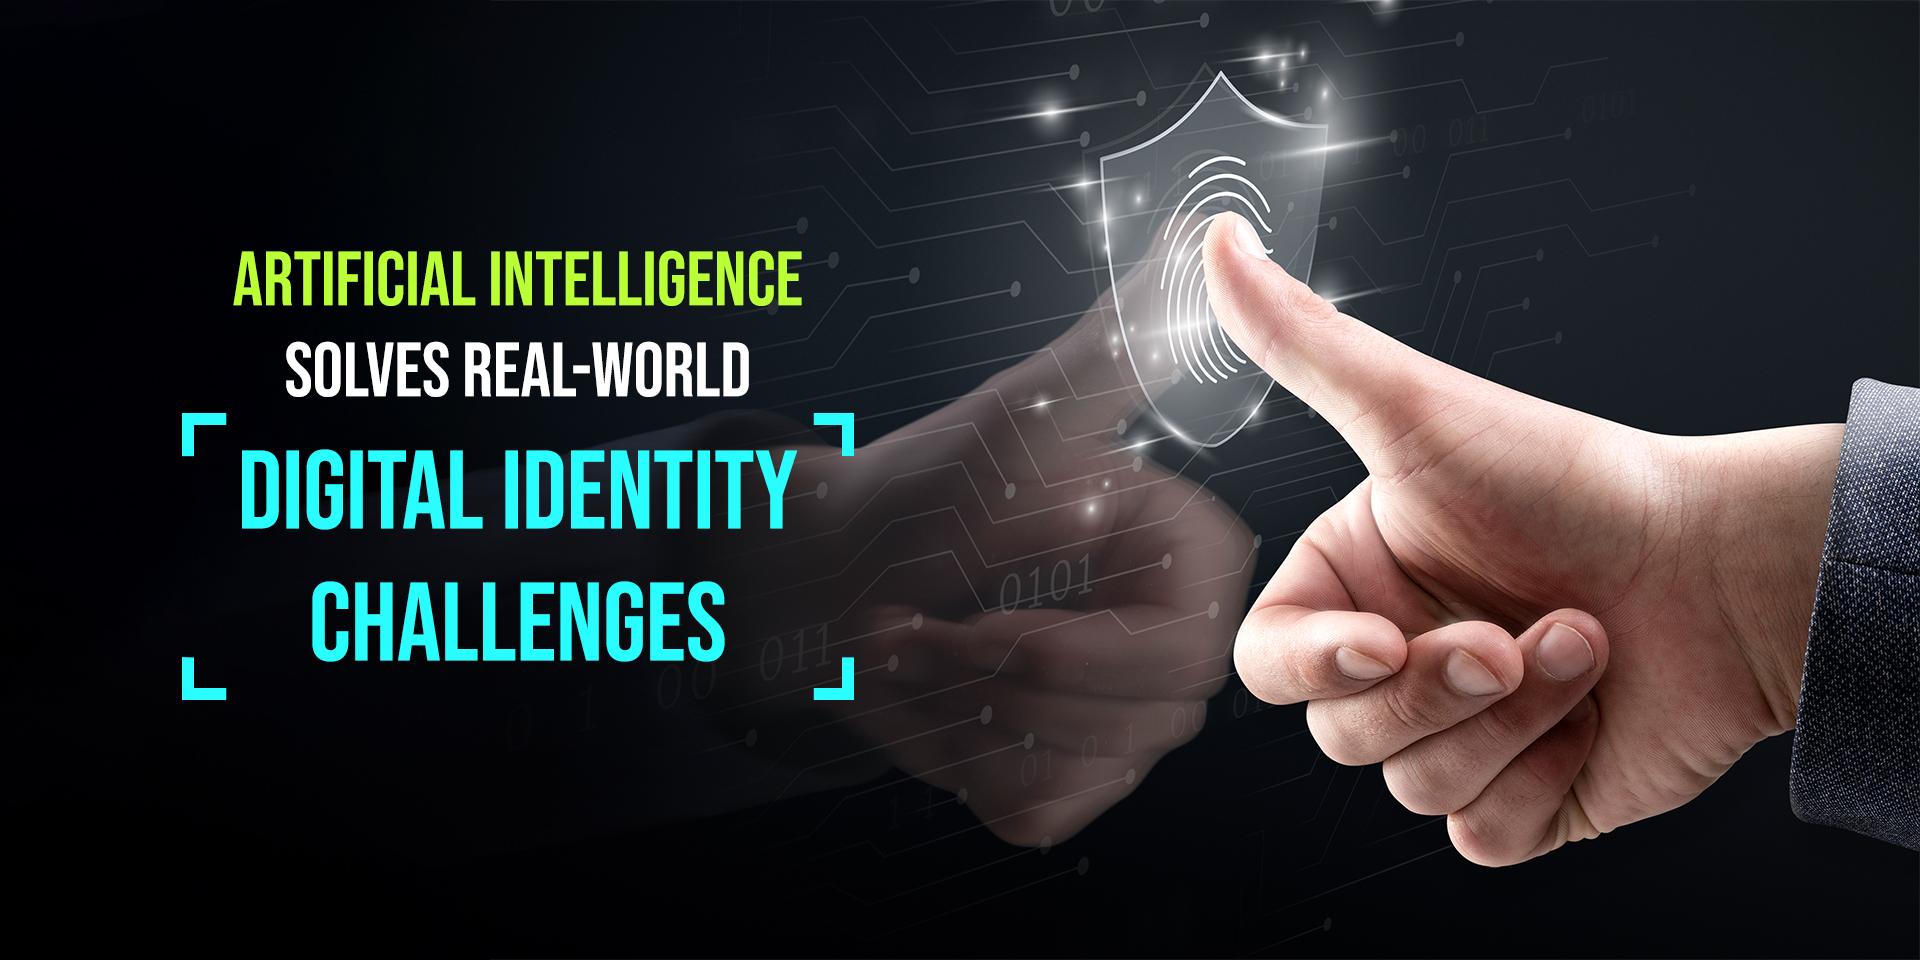 How is Artificial Intelligence Helping to Solve Real-world Digital Identity Problems?